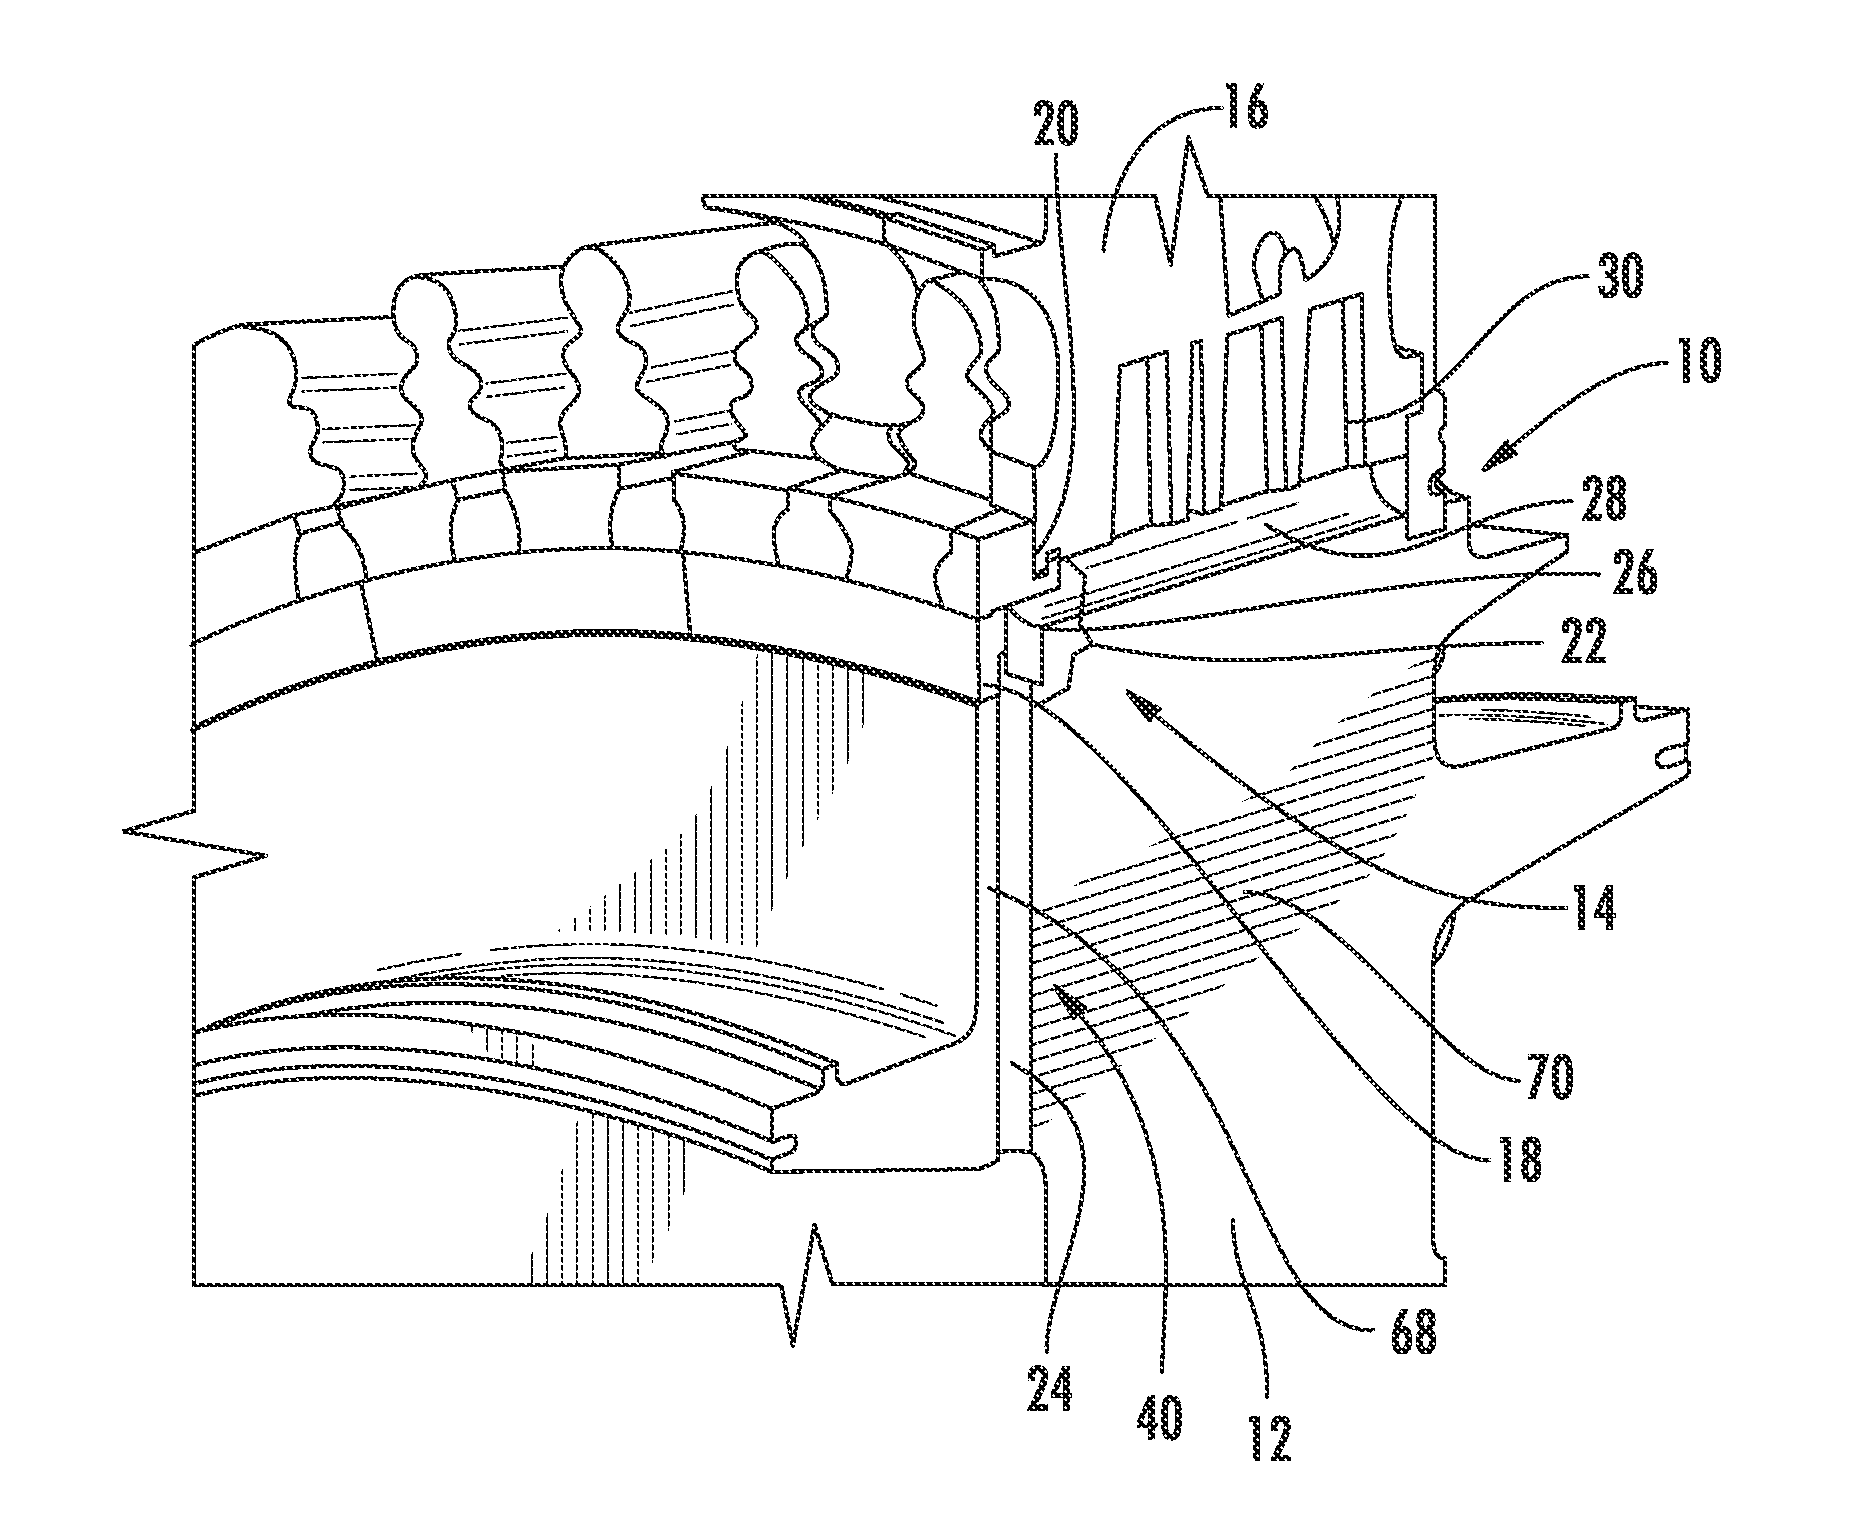 Seal system for cooling fluid flow through a rotor assembly in a gas turbine engine